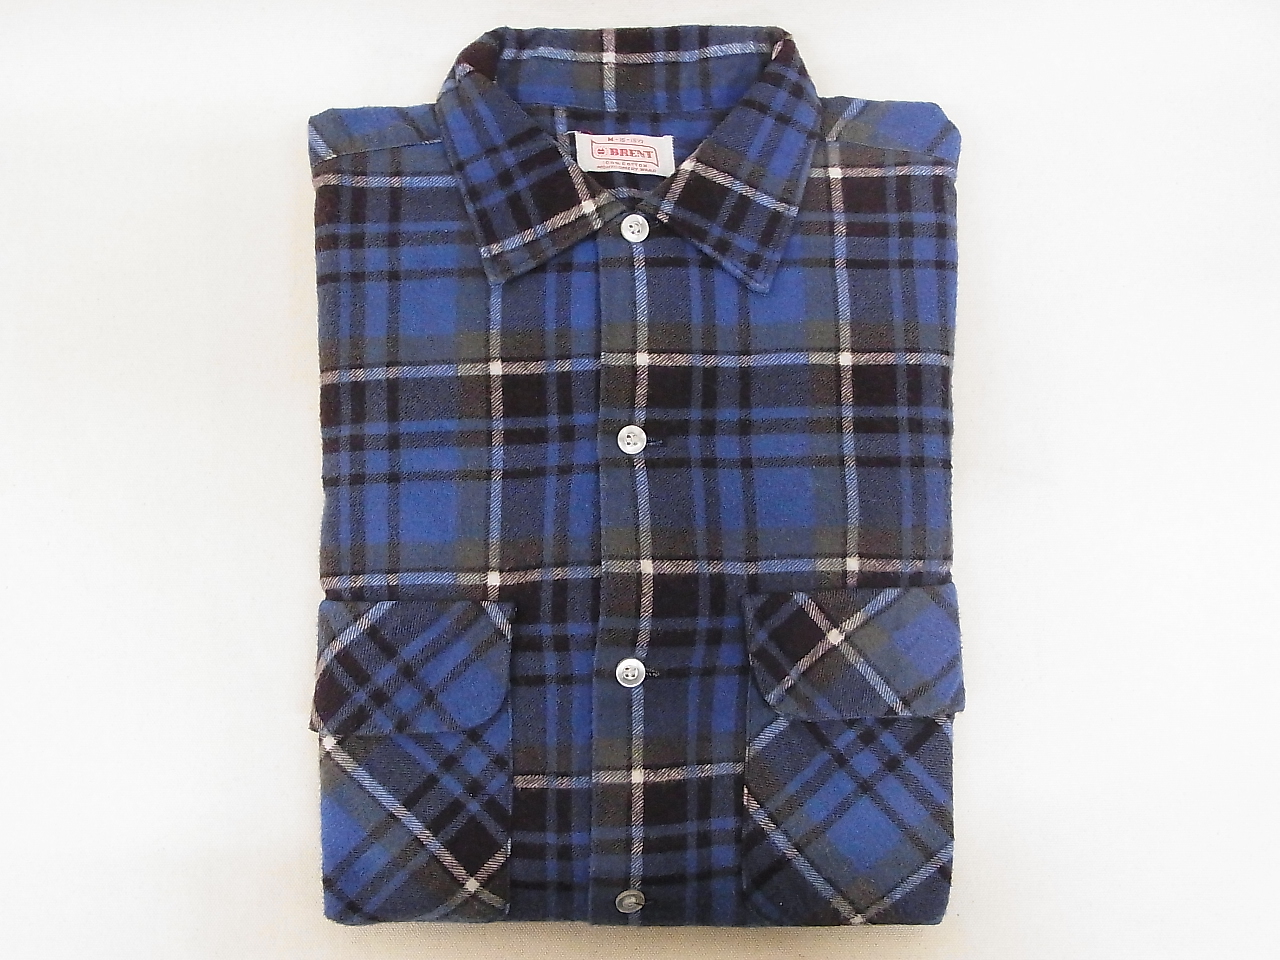 brent-printed-flannelshirts-20190325-1